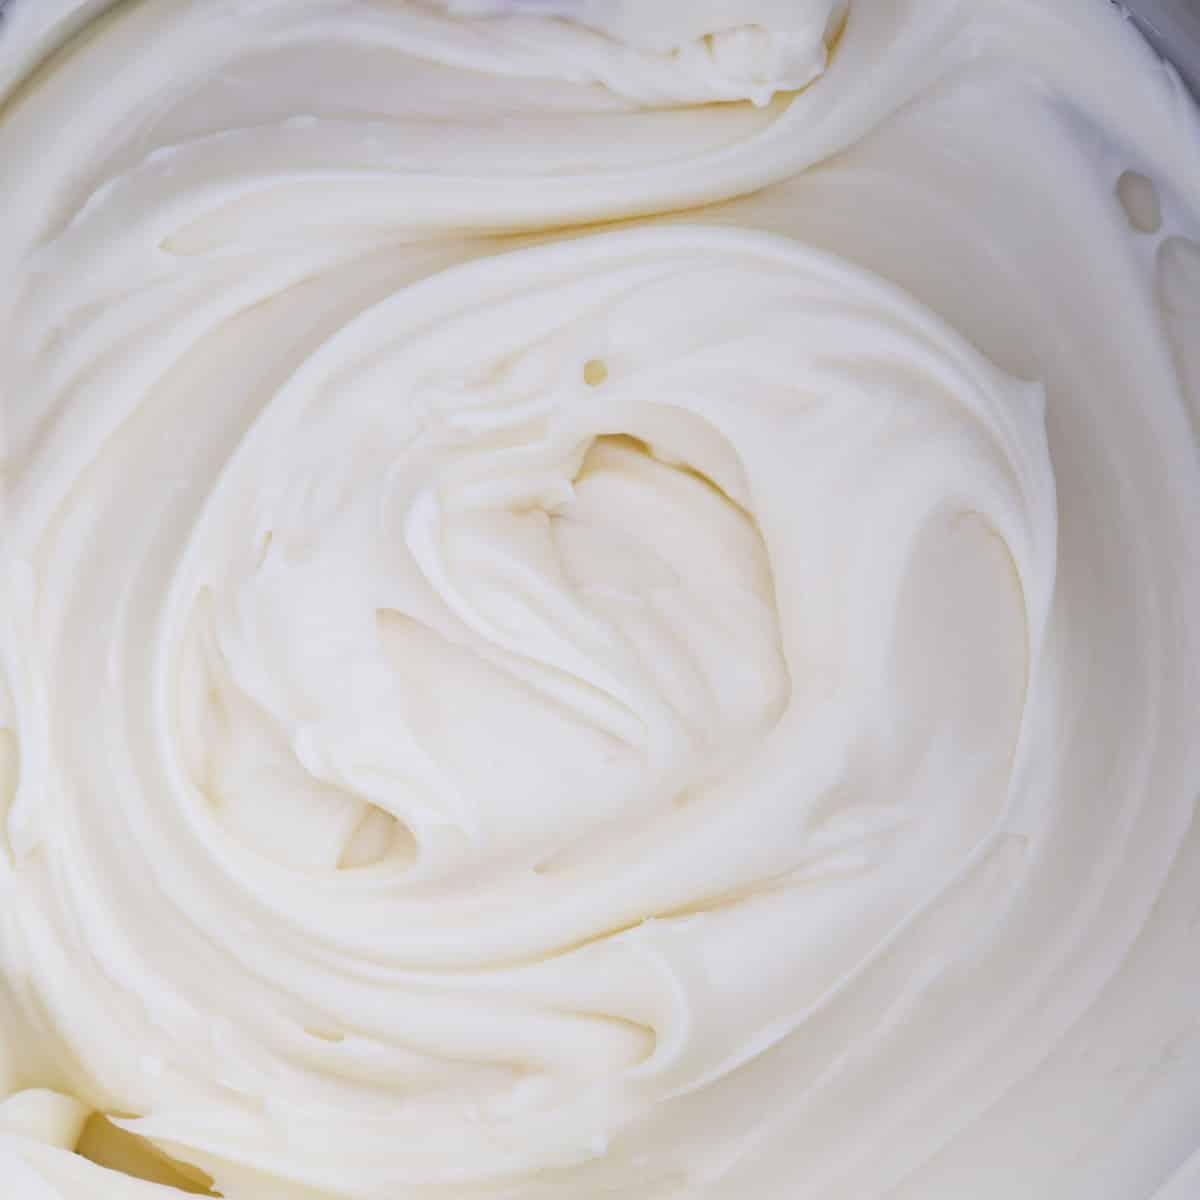 Cream Cheese Buttercream in mixing bowl